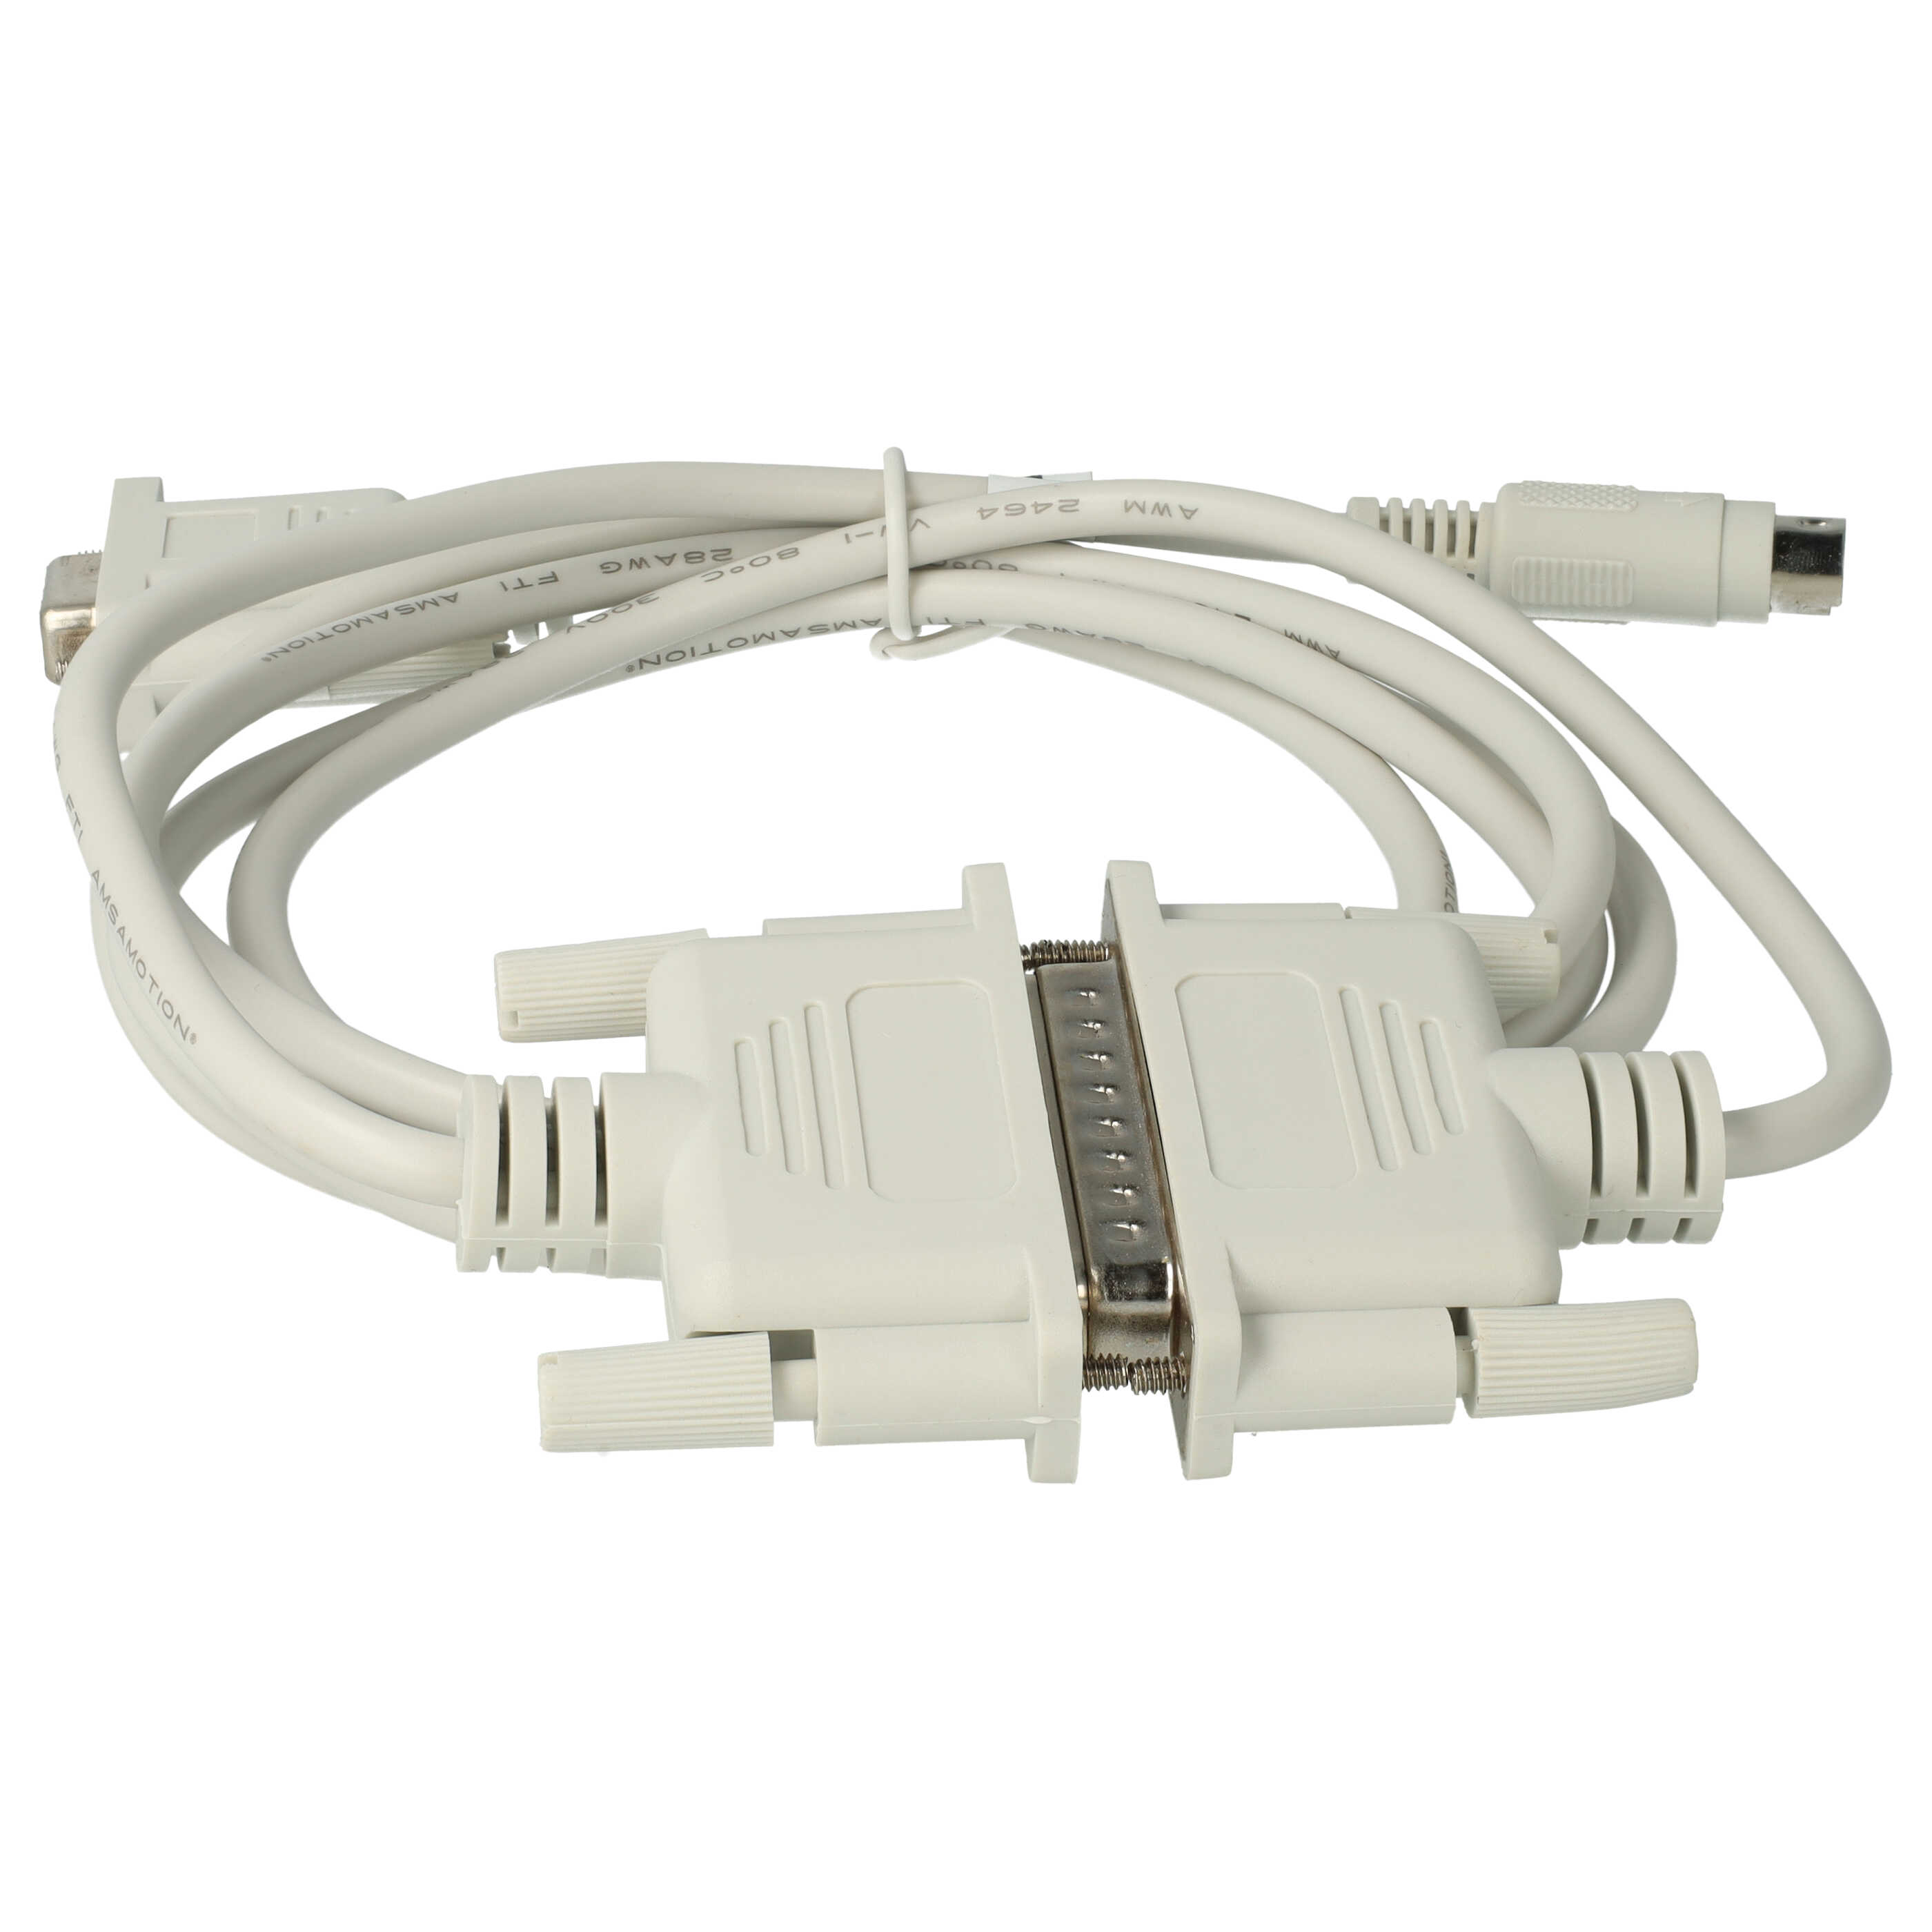 Programming Lead RS-232 suitable for Mitsubishi MELSEC FX PC & Peripherals - Adapter 200cm, Grey